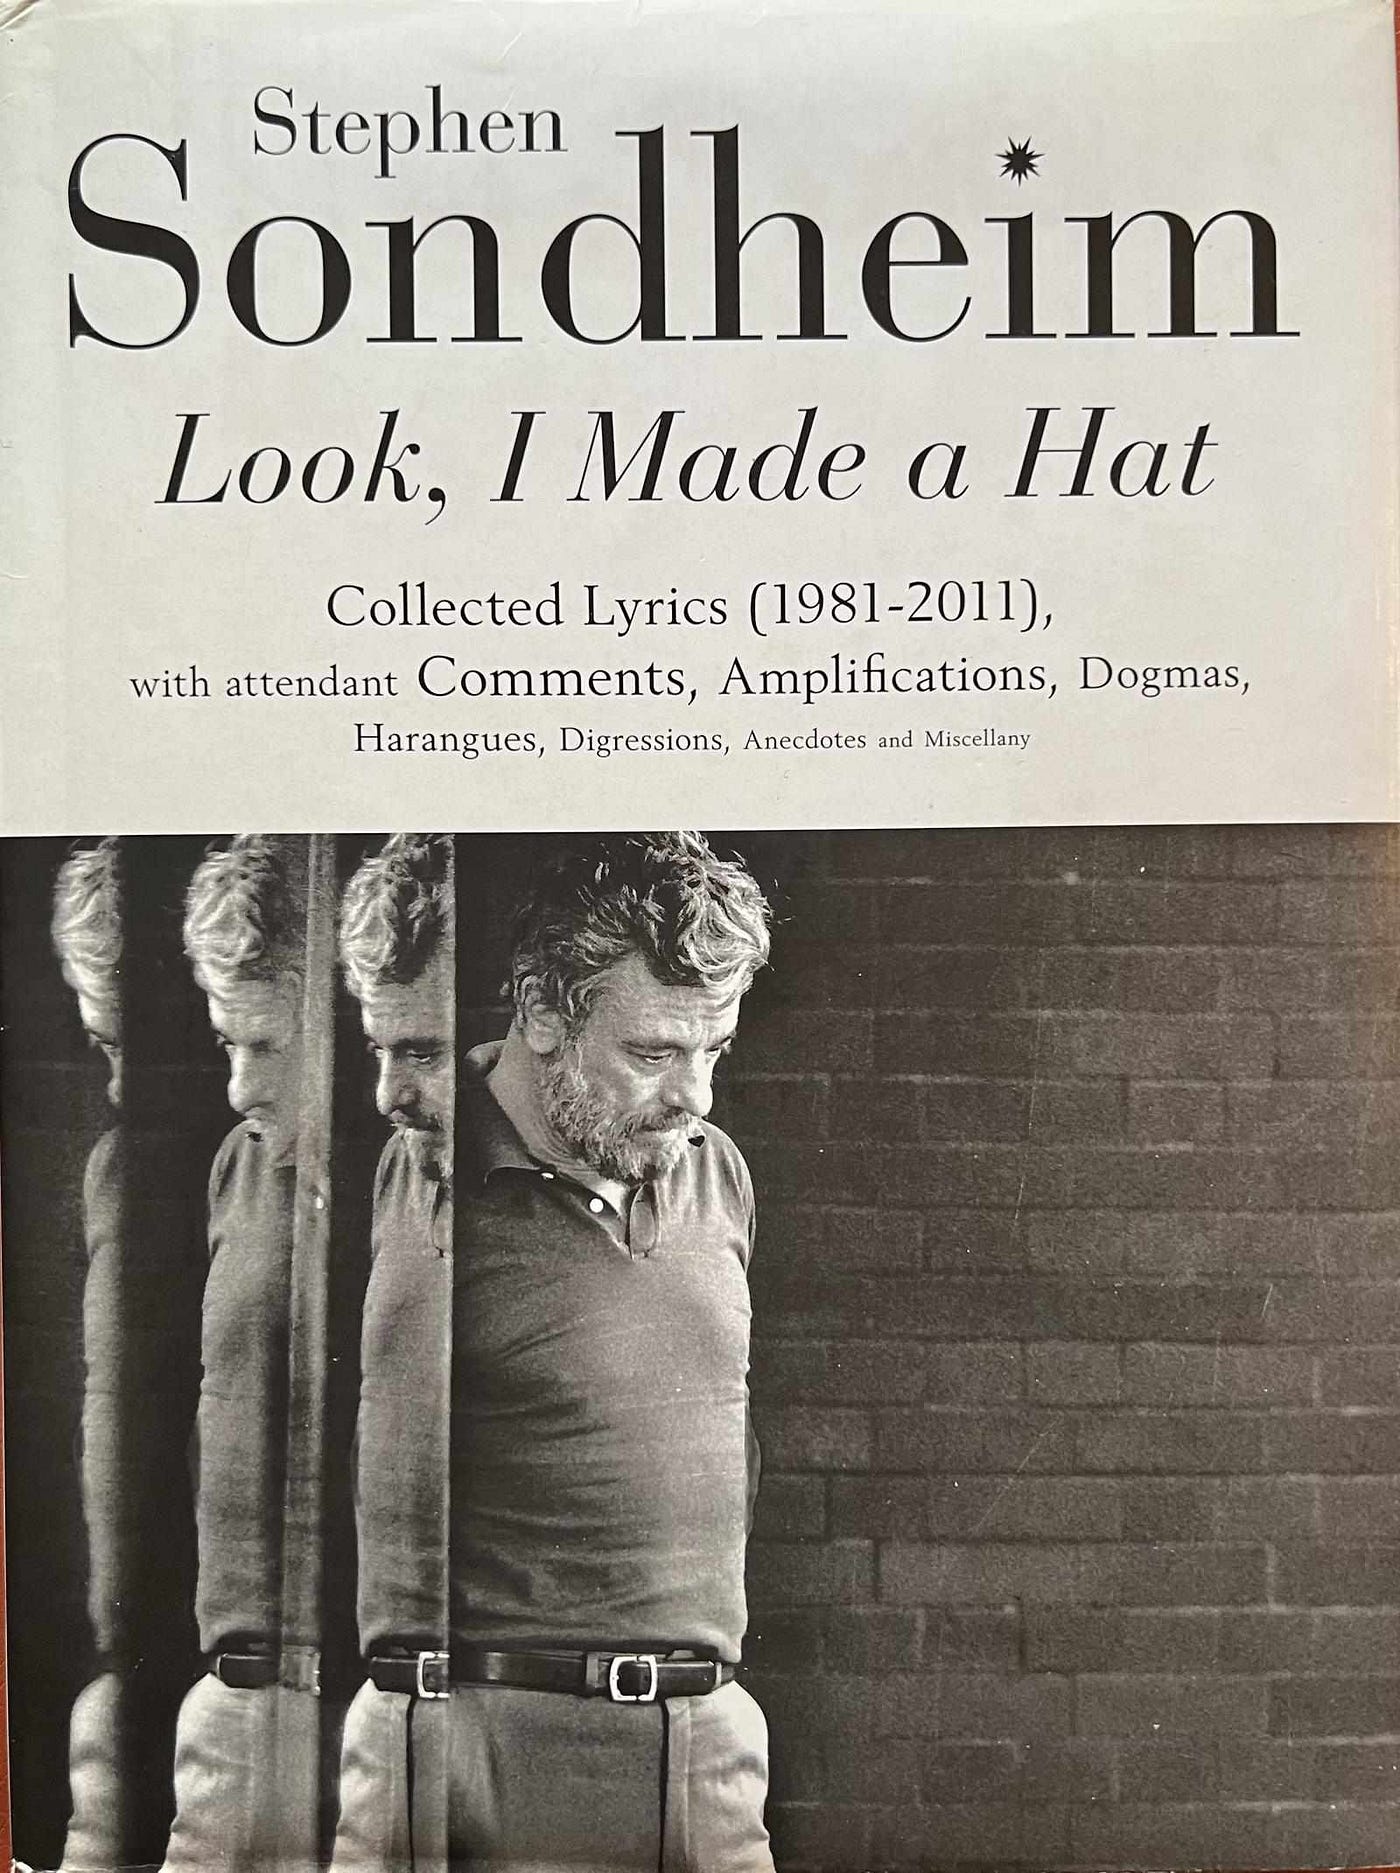 SONDHEIM ON THE OTHER GUYS (AND A DOLL OR TWO). | by Ron Fassler | Medium